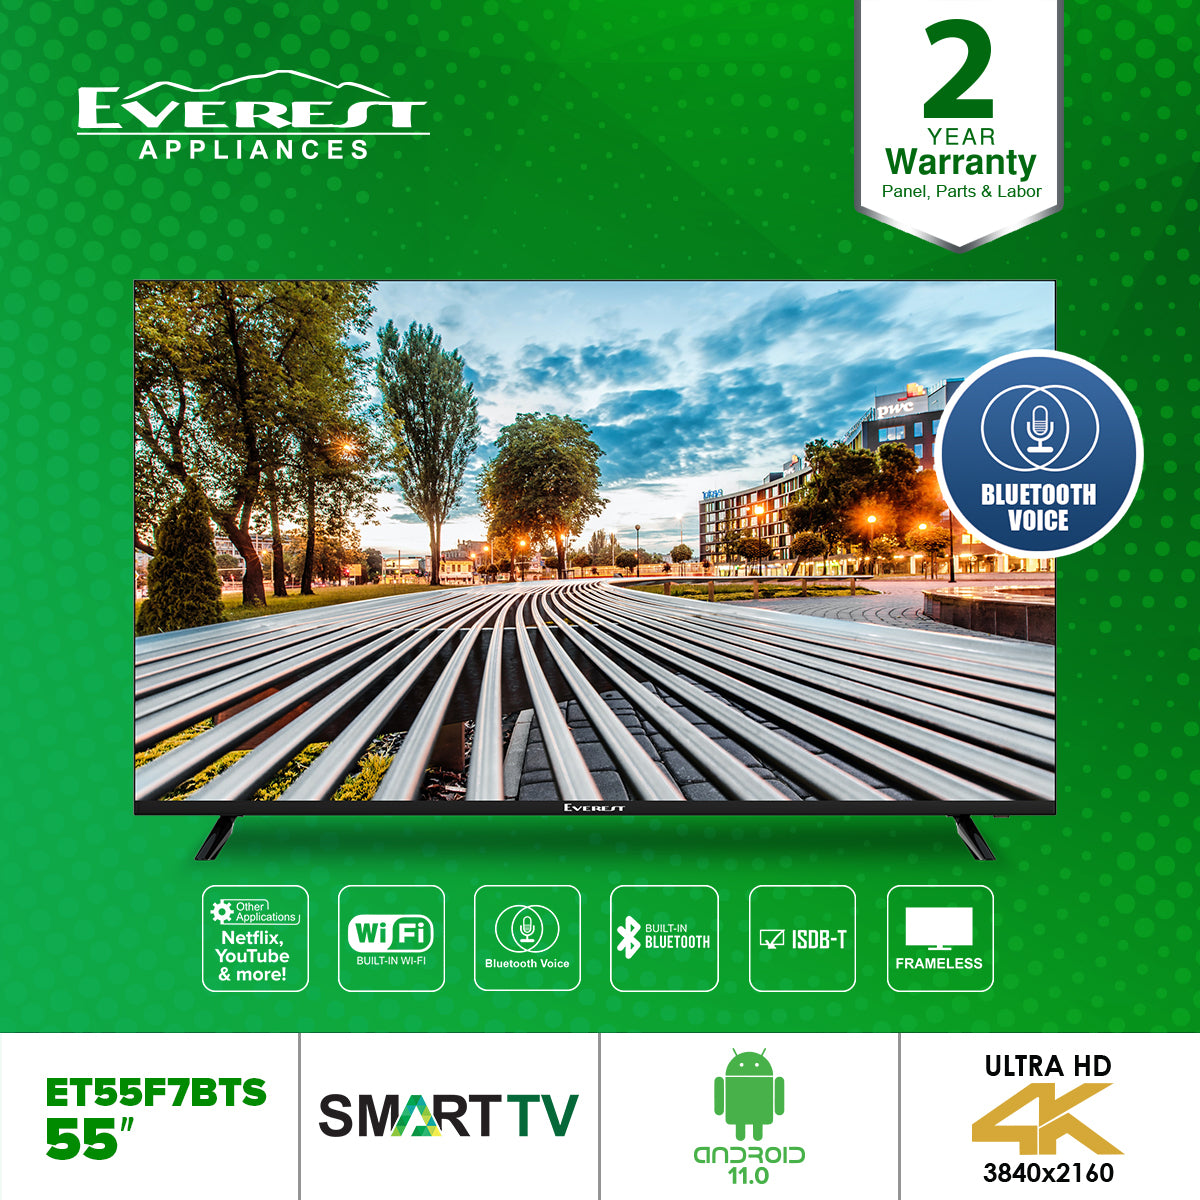 55" Android Smart TV